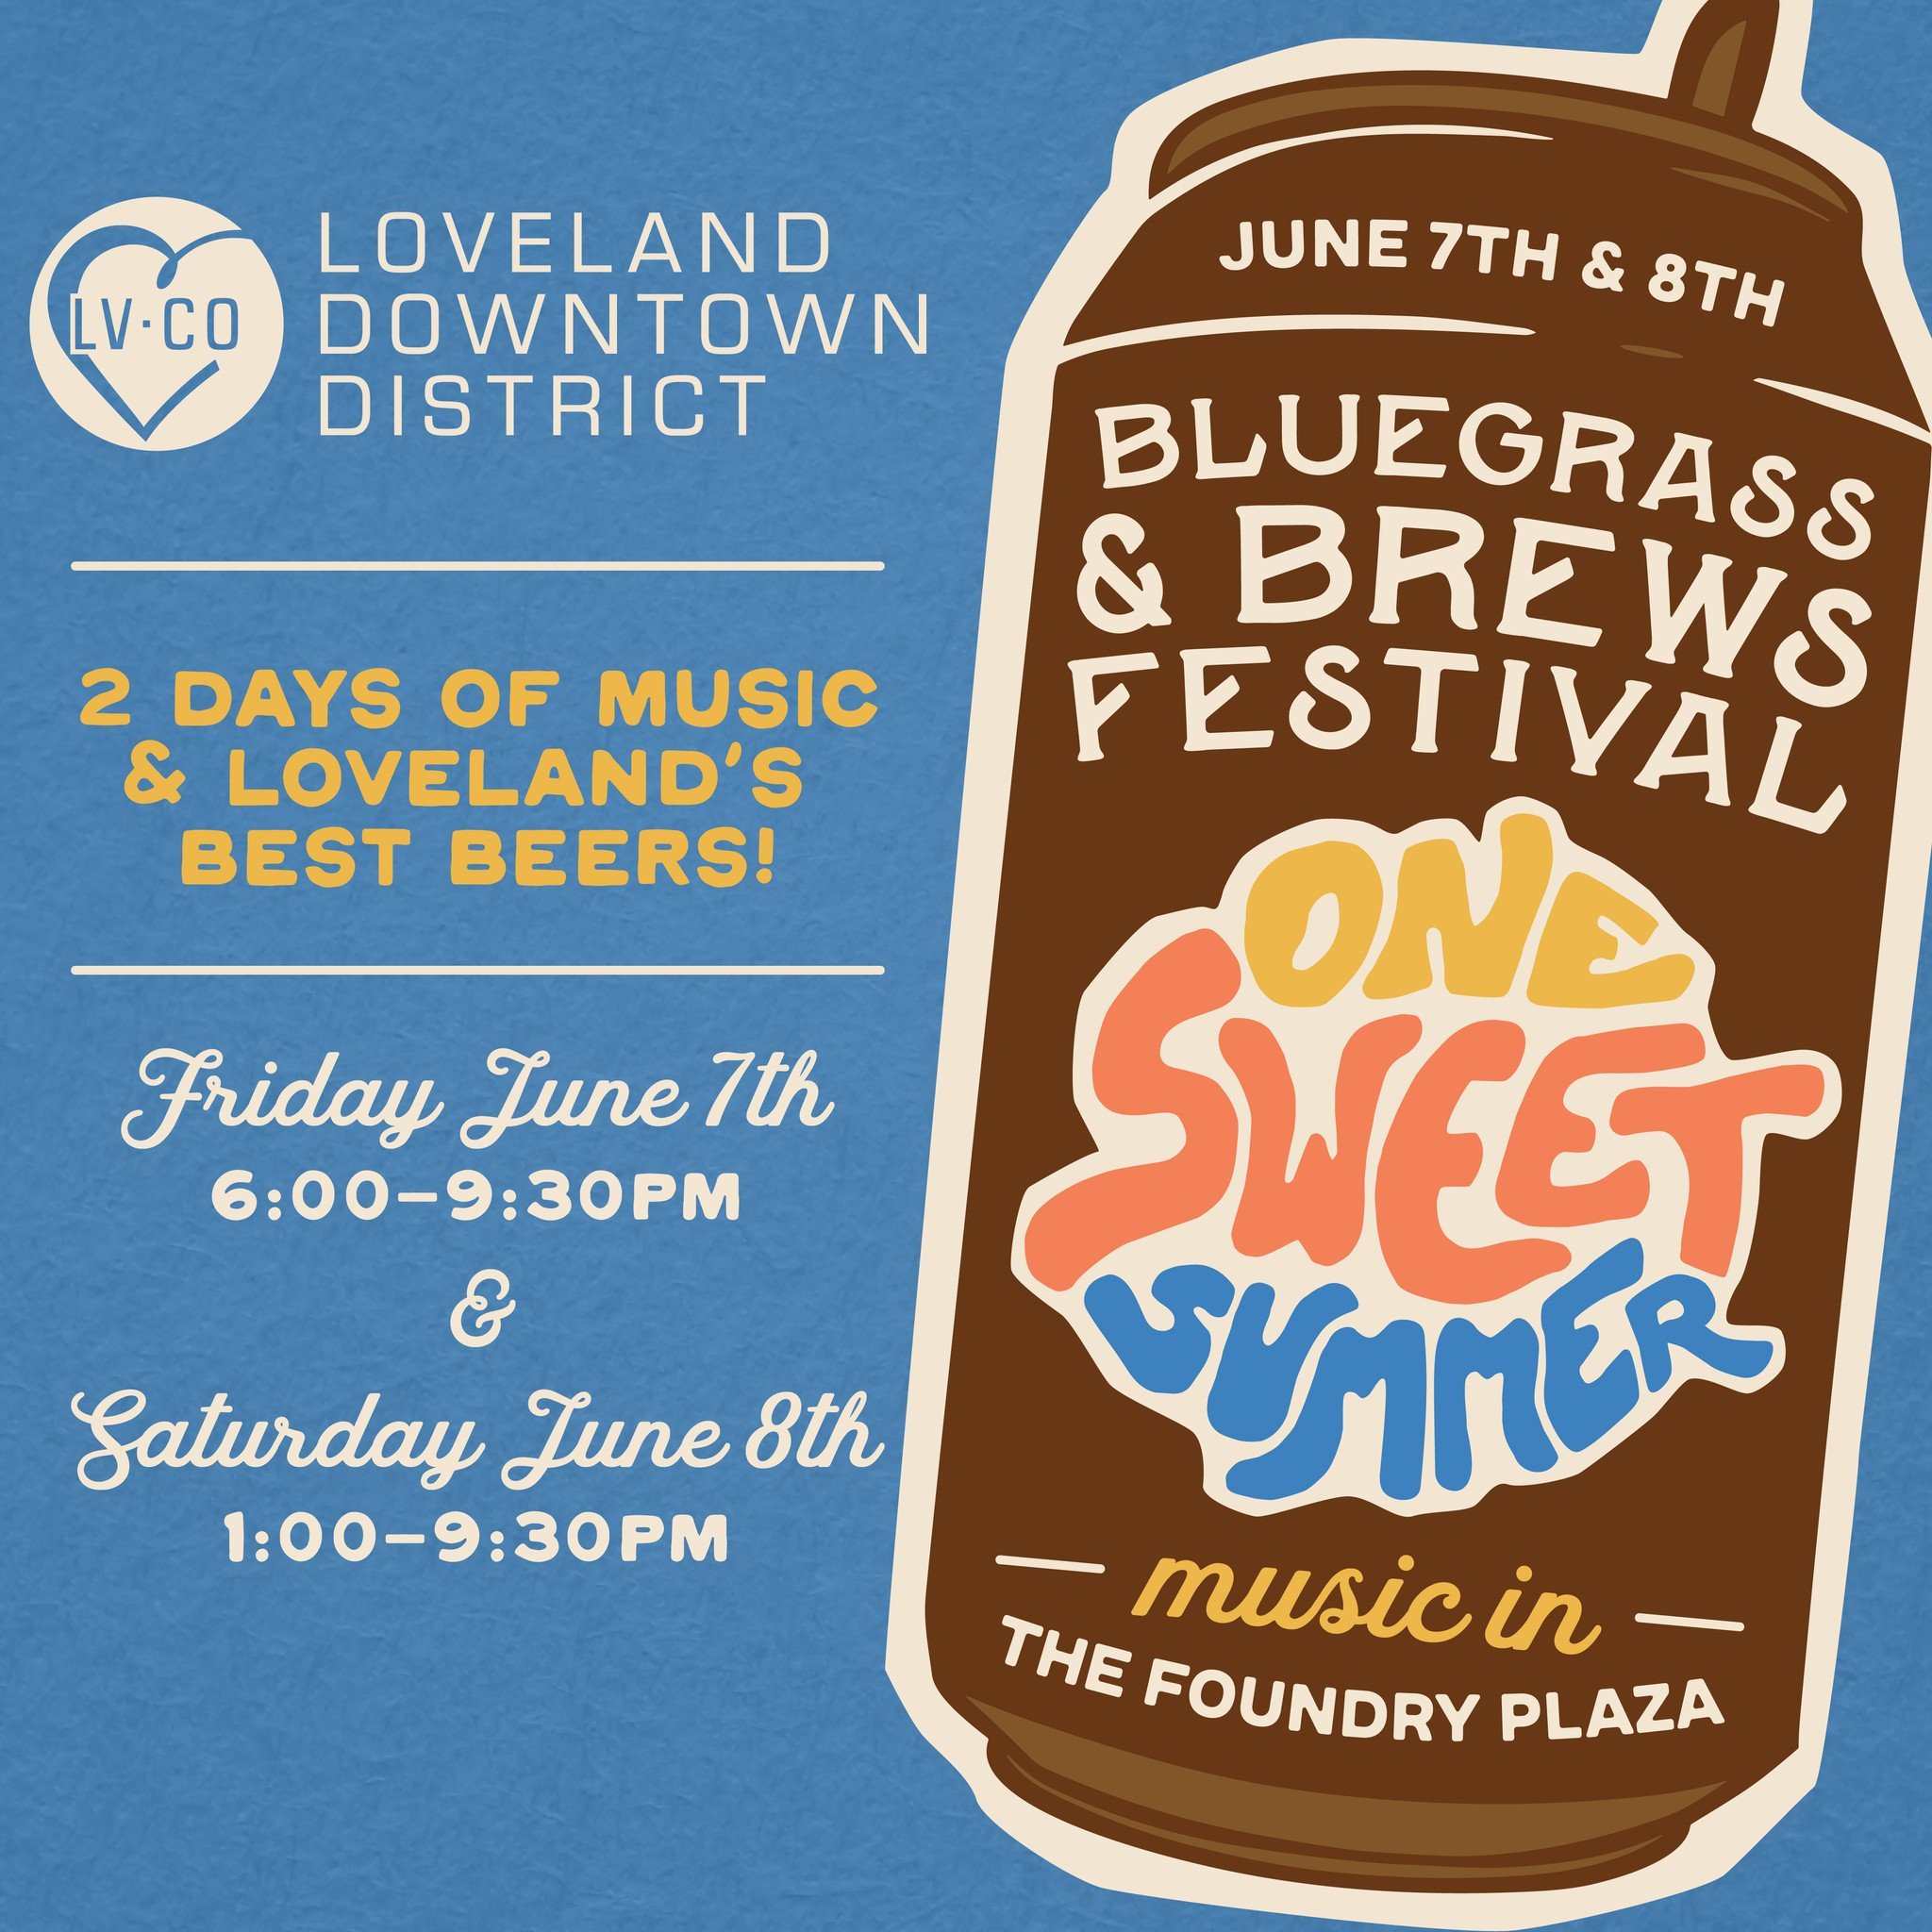 Mark your calendars! Our 4th Annual Bluegrass and Brews Festival is June 7th &amp; 8th in Downtown Loveland! 

Our band line-up is absolutely stacked this year and all you favorite breweries will be there pouring their delicious brews! You won&rsquo;